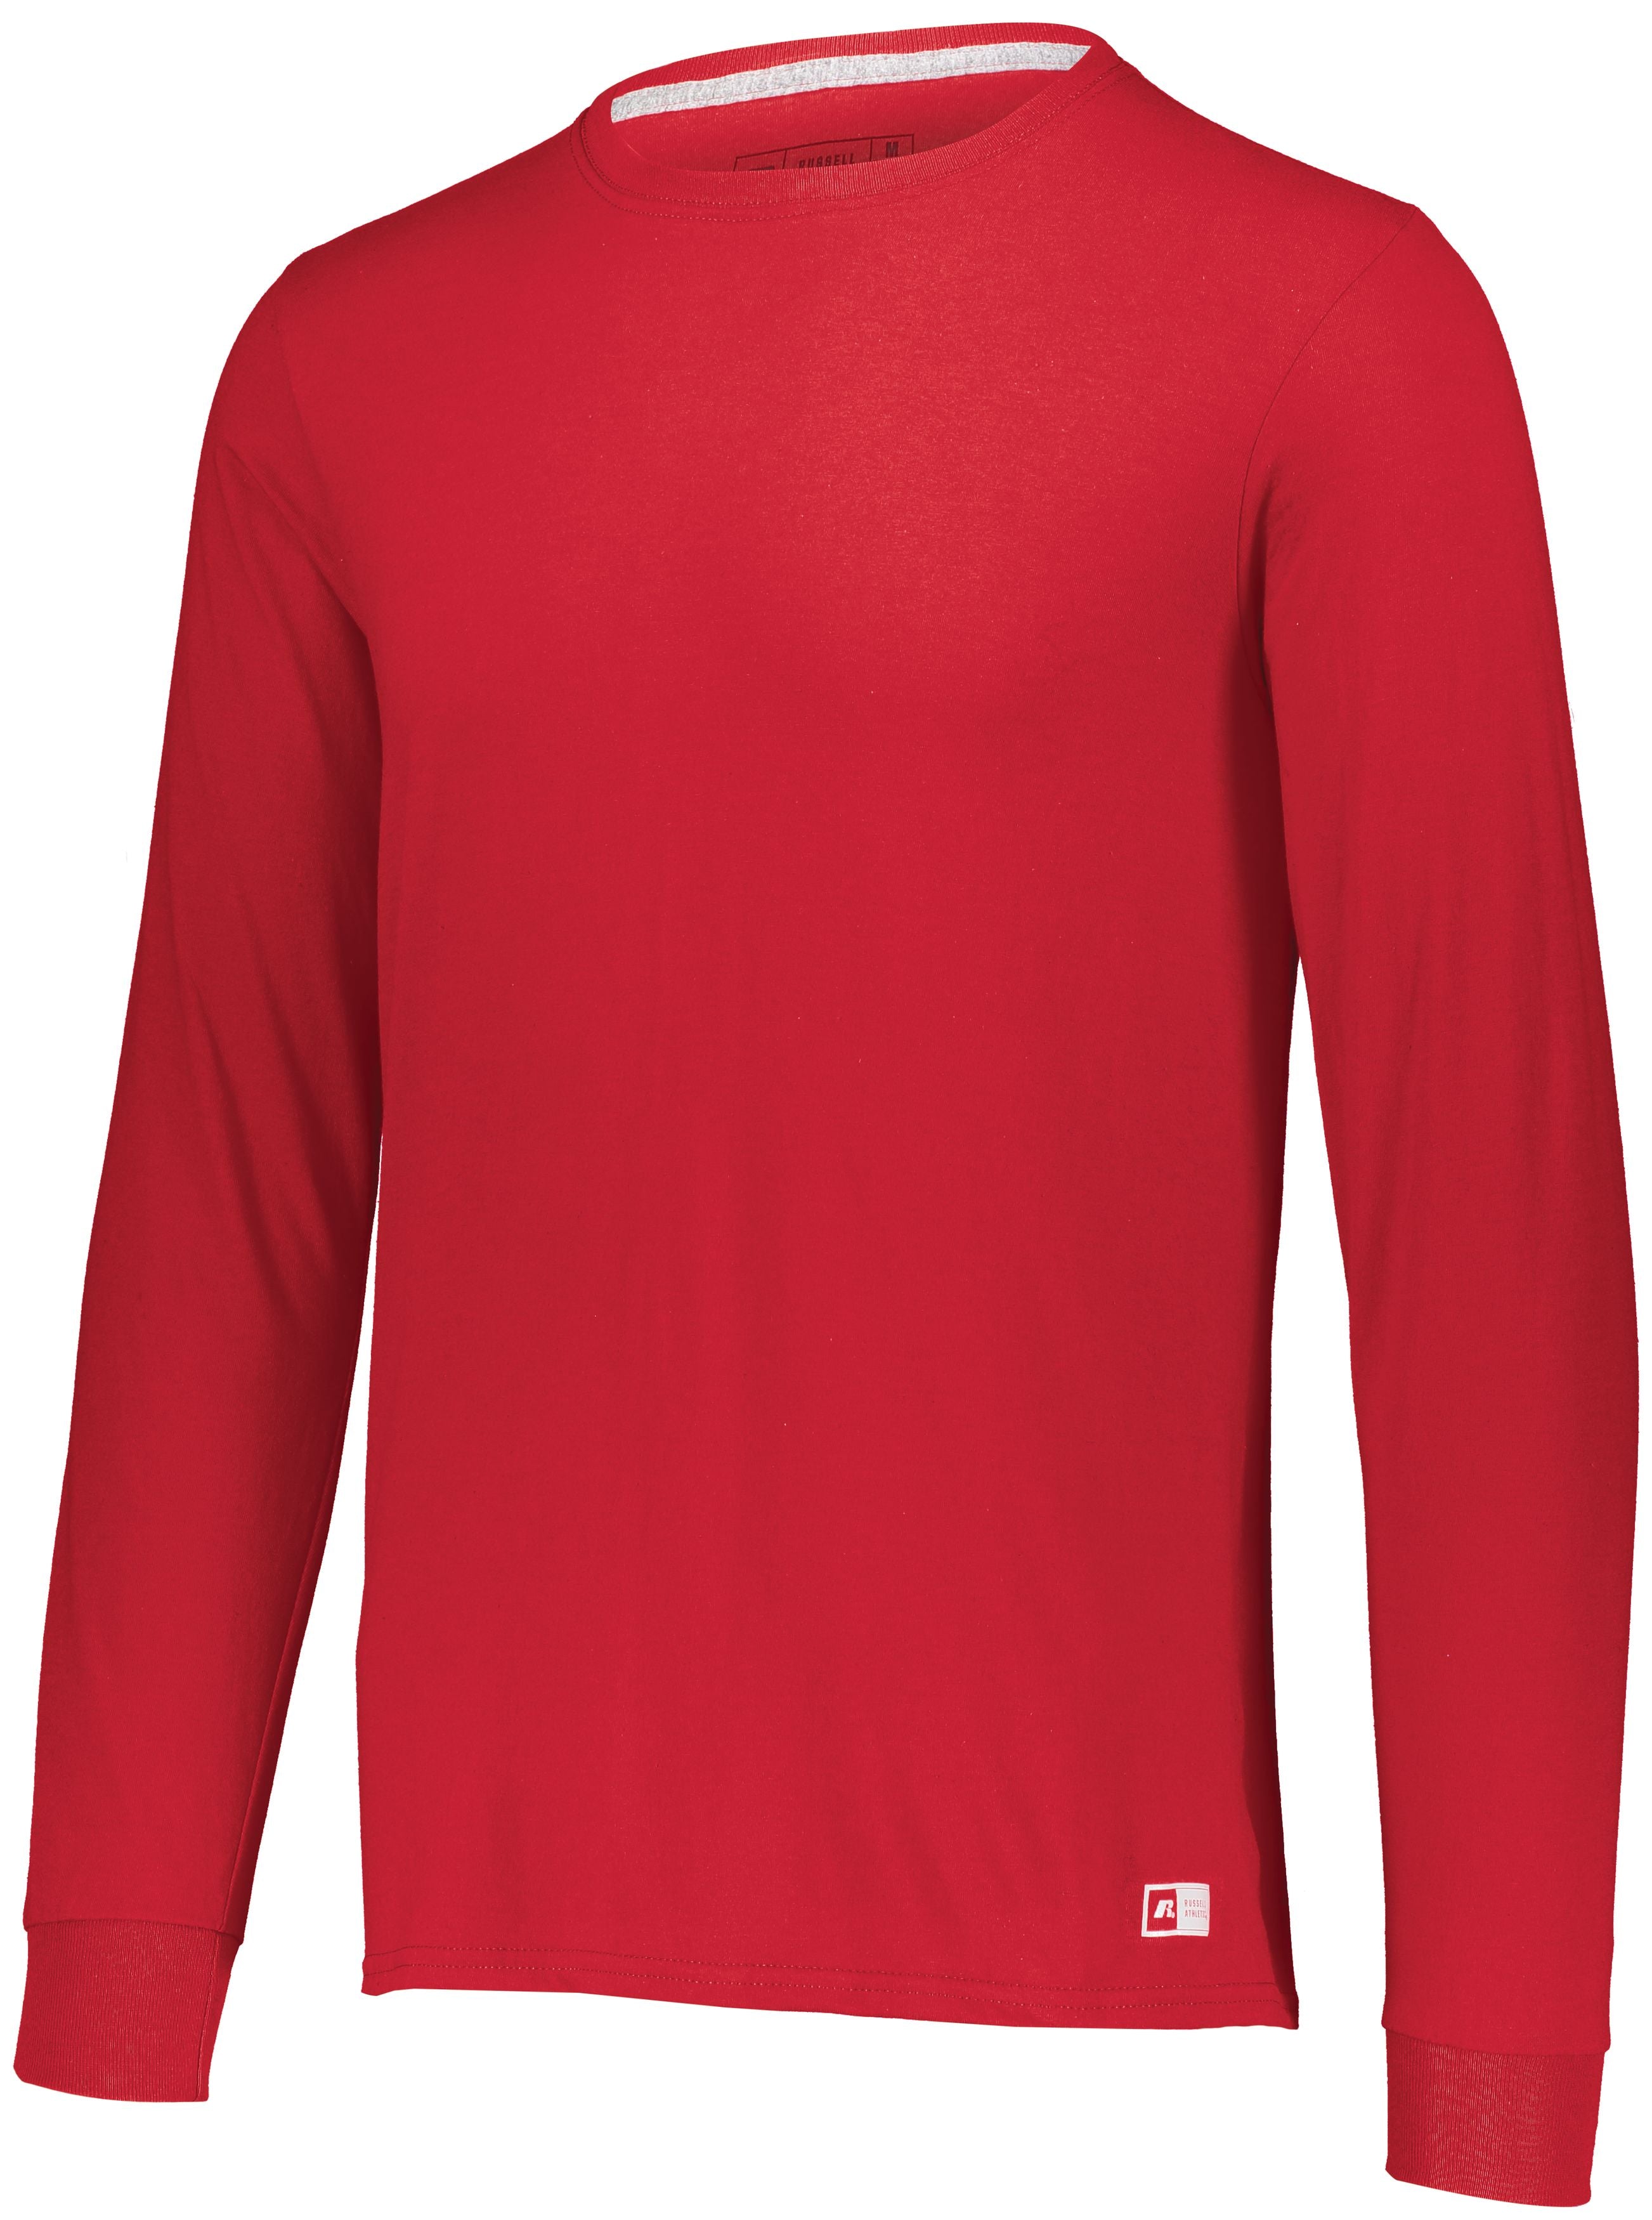 Russell Athletic Essential Long Sleeve Tee in True Red  -Part of the Adult, Adult-Tee-Shirt, T-Shirts, Russell-Athletic-Products, Shirts product lines at KanaleyCreations.com